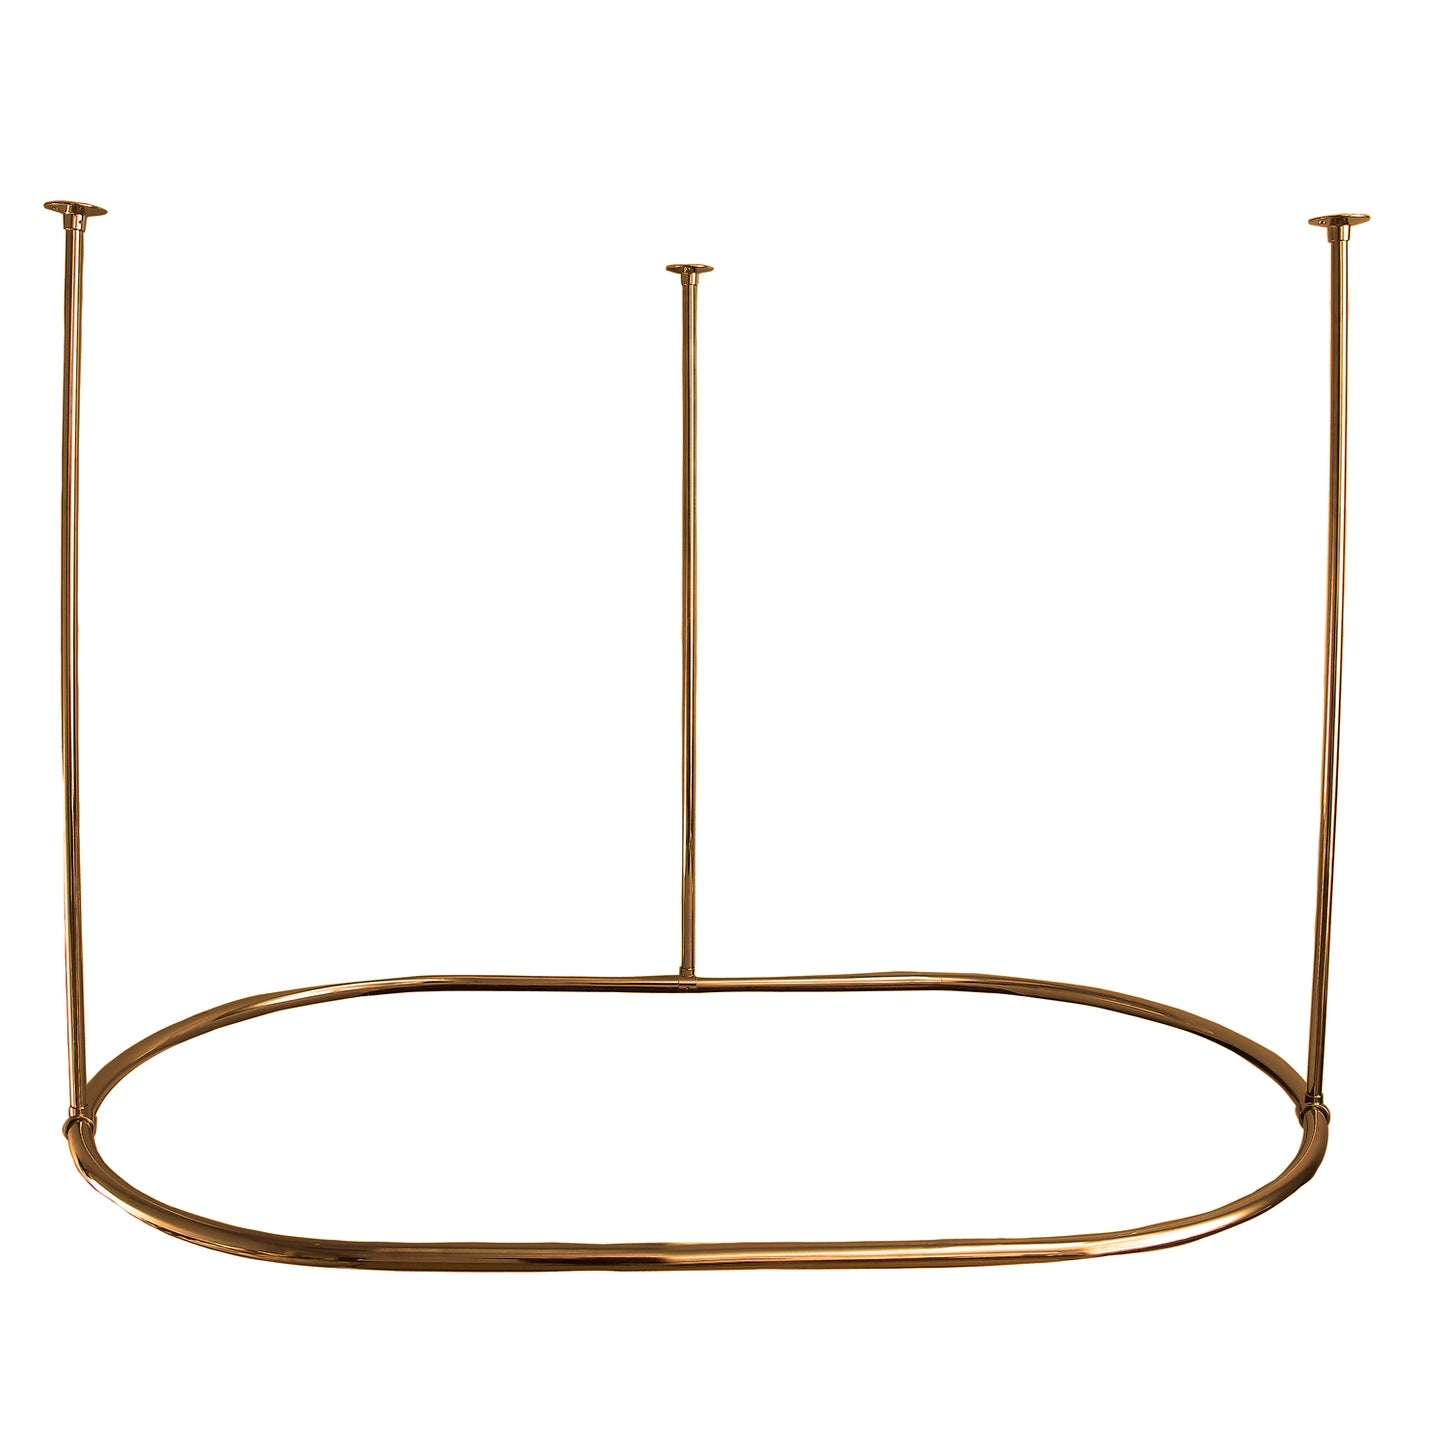 48" x 36" Oval Shower Curtain Ring in Polished Brass